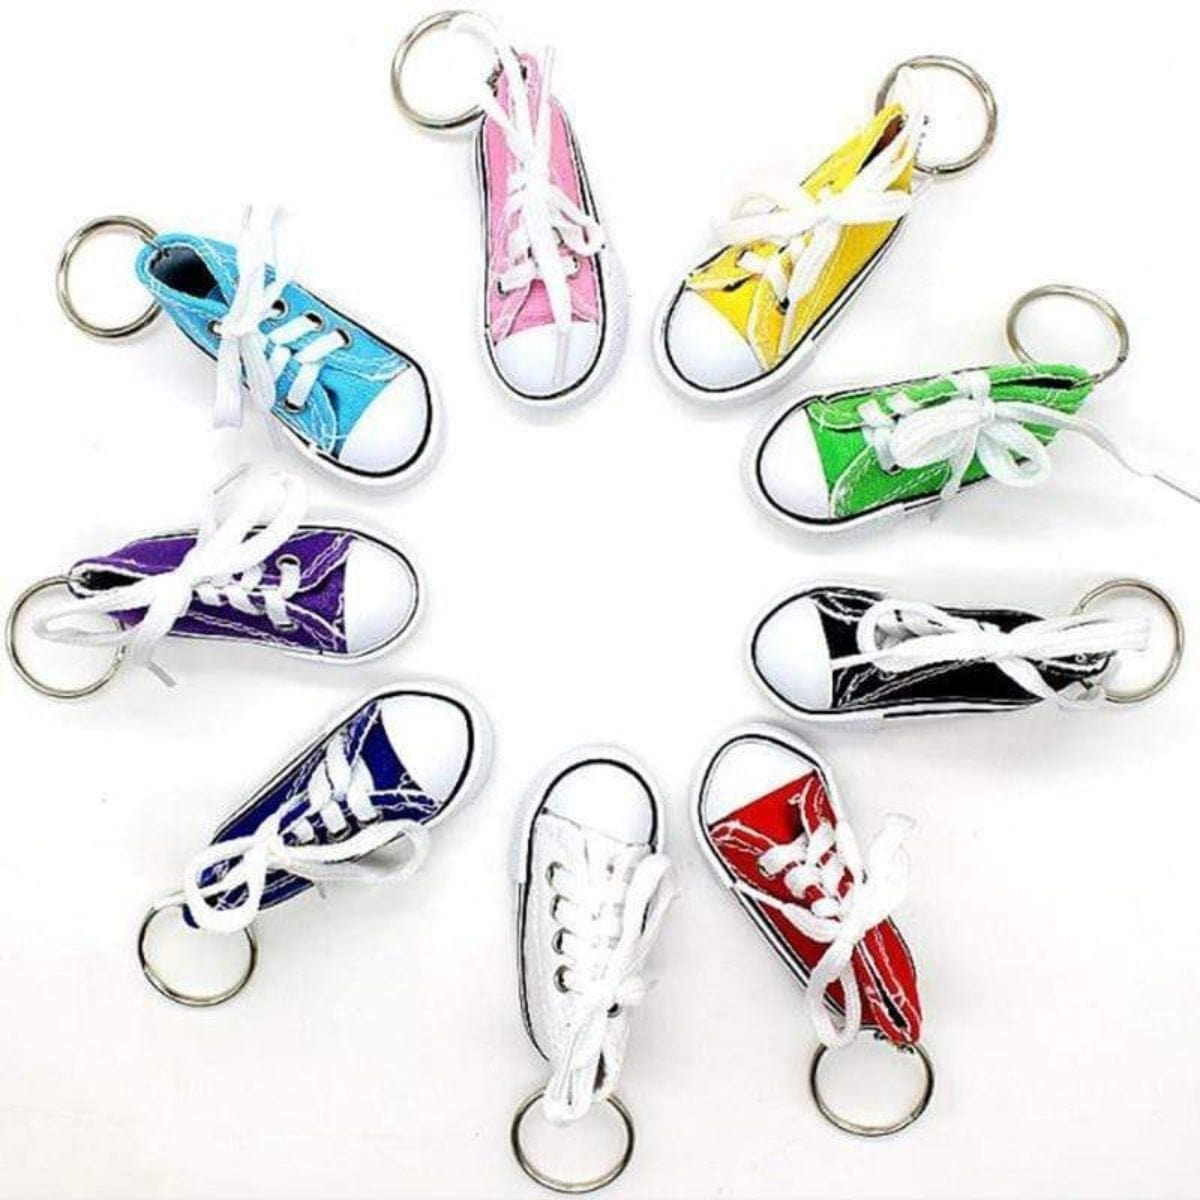 keychain-canvas-shoe-charms-pink.jpg